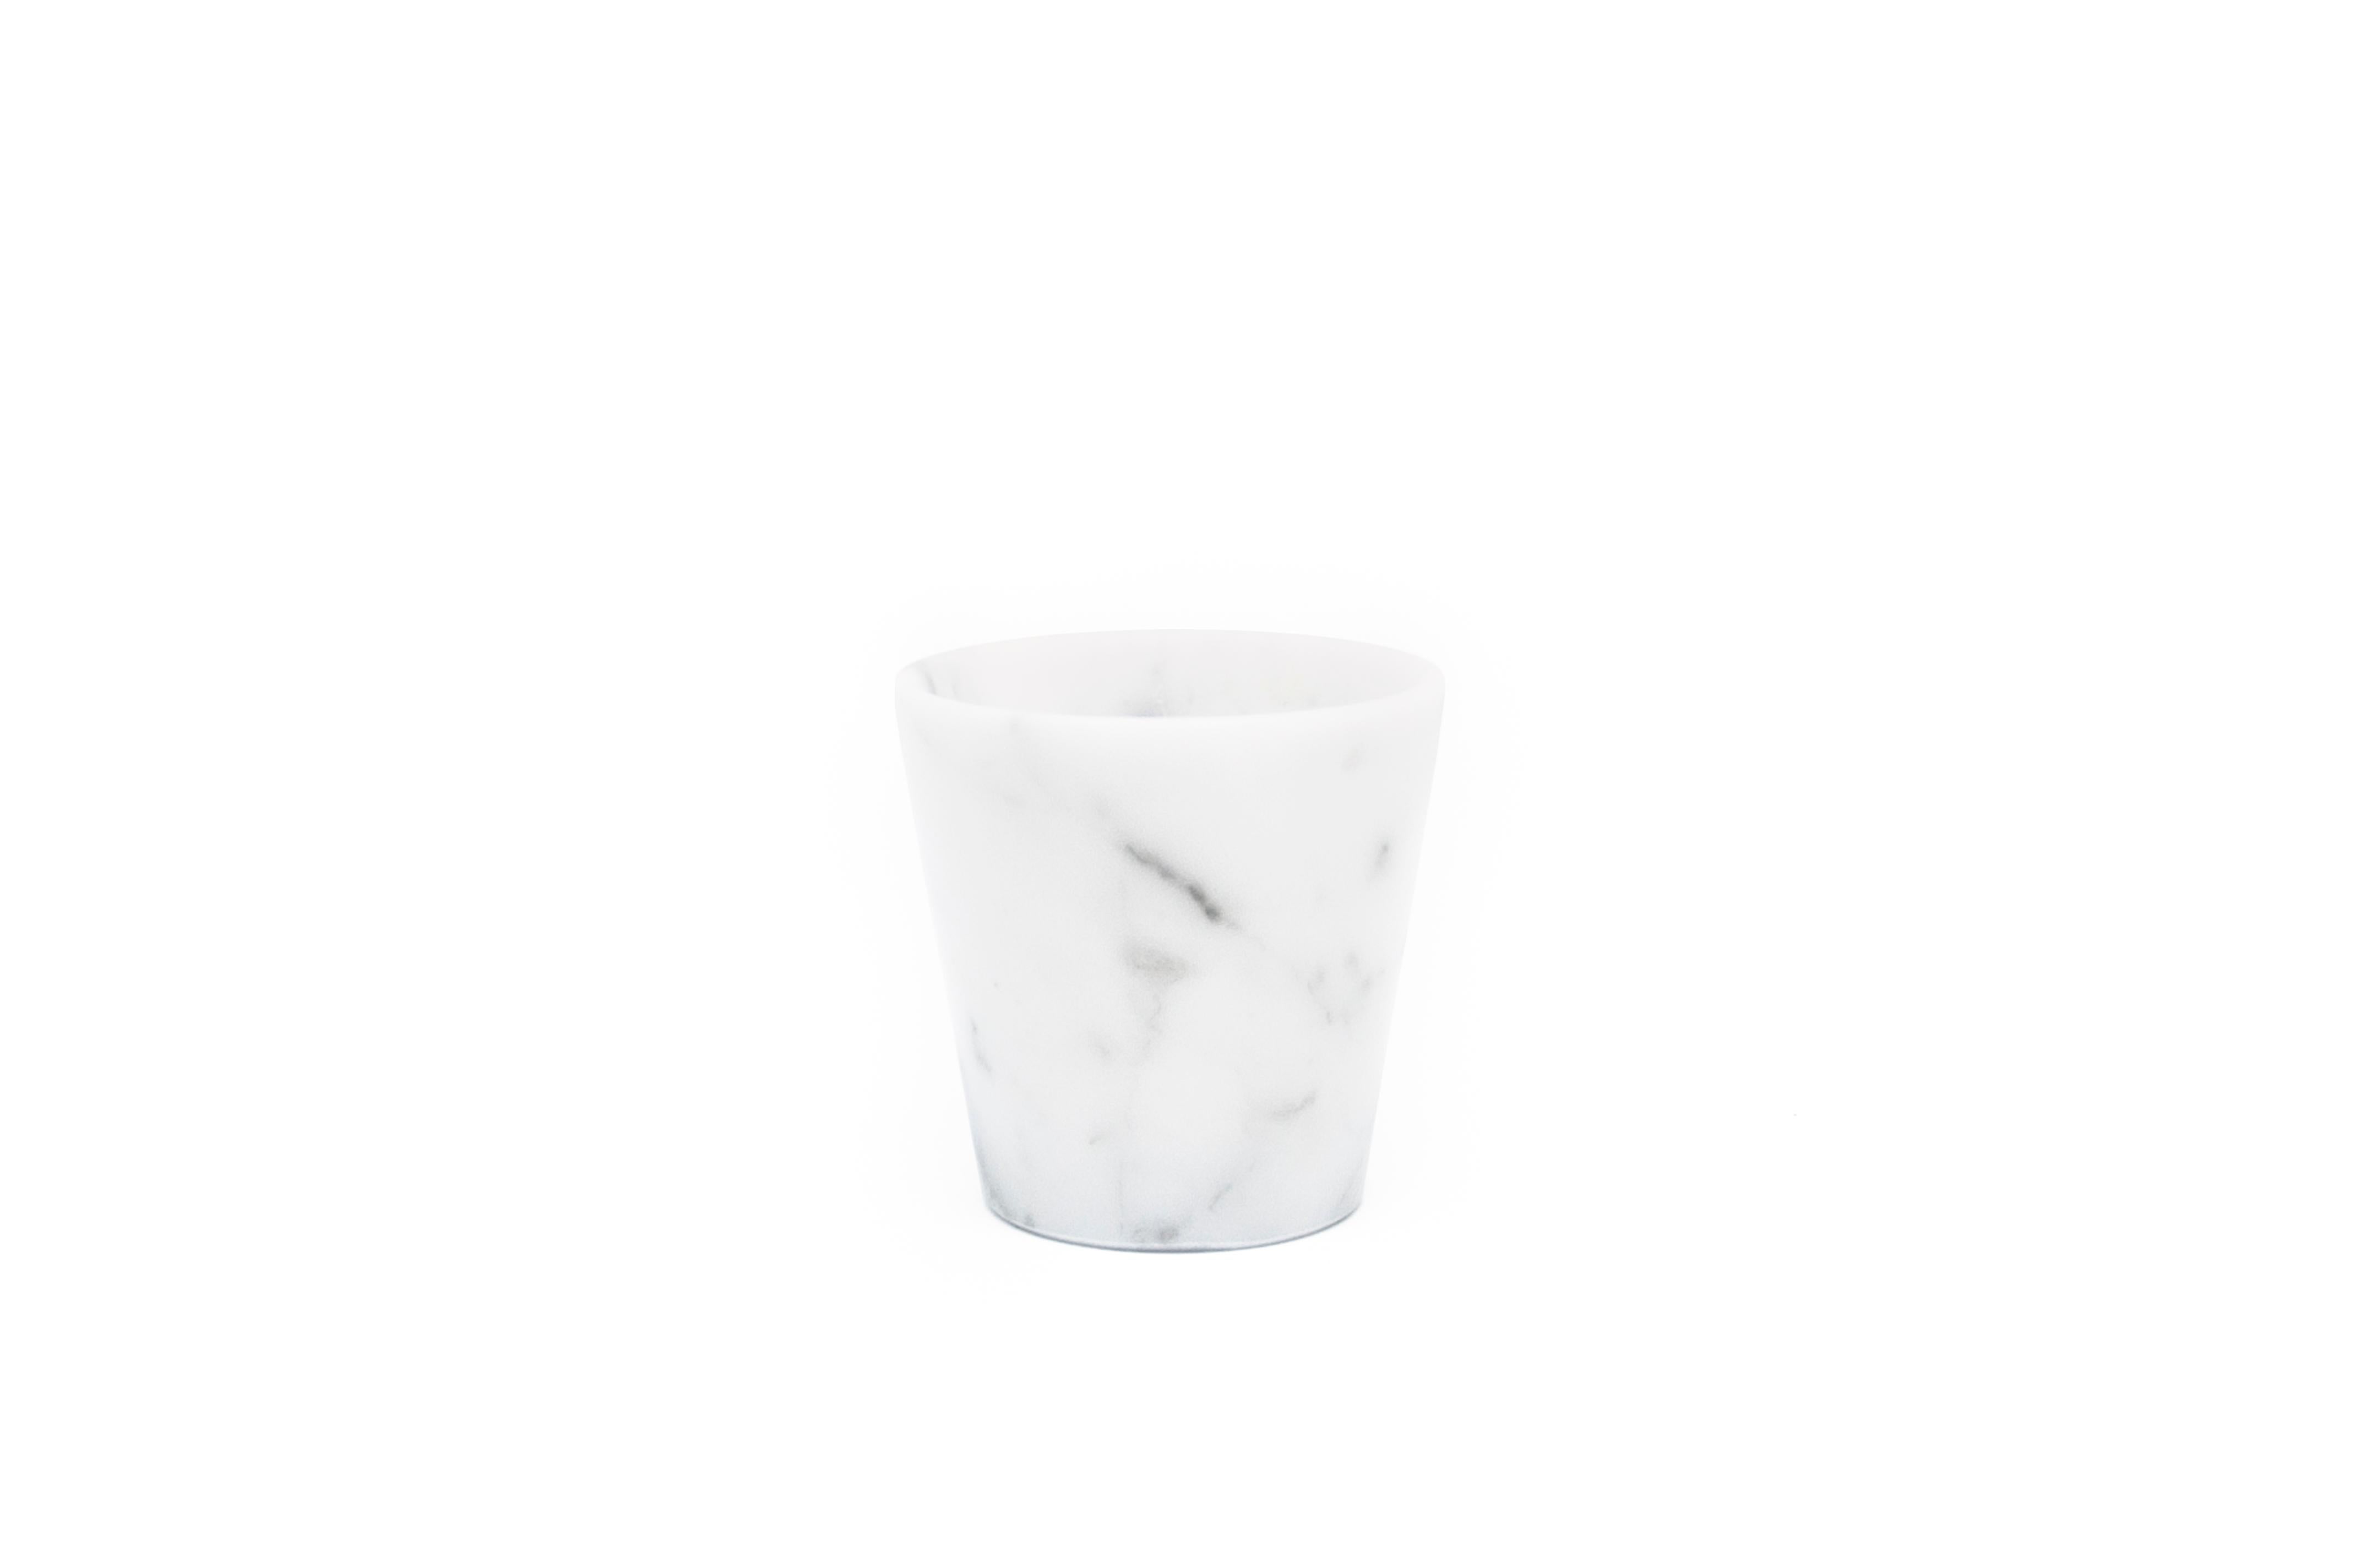 Hand-Crafted Grappa Glass in White Carrara Marble